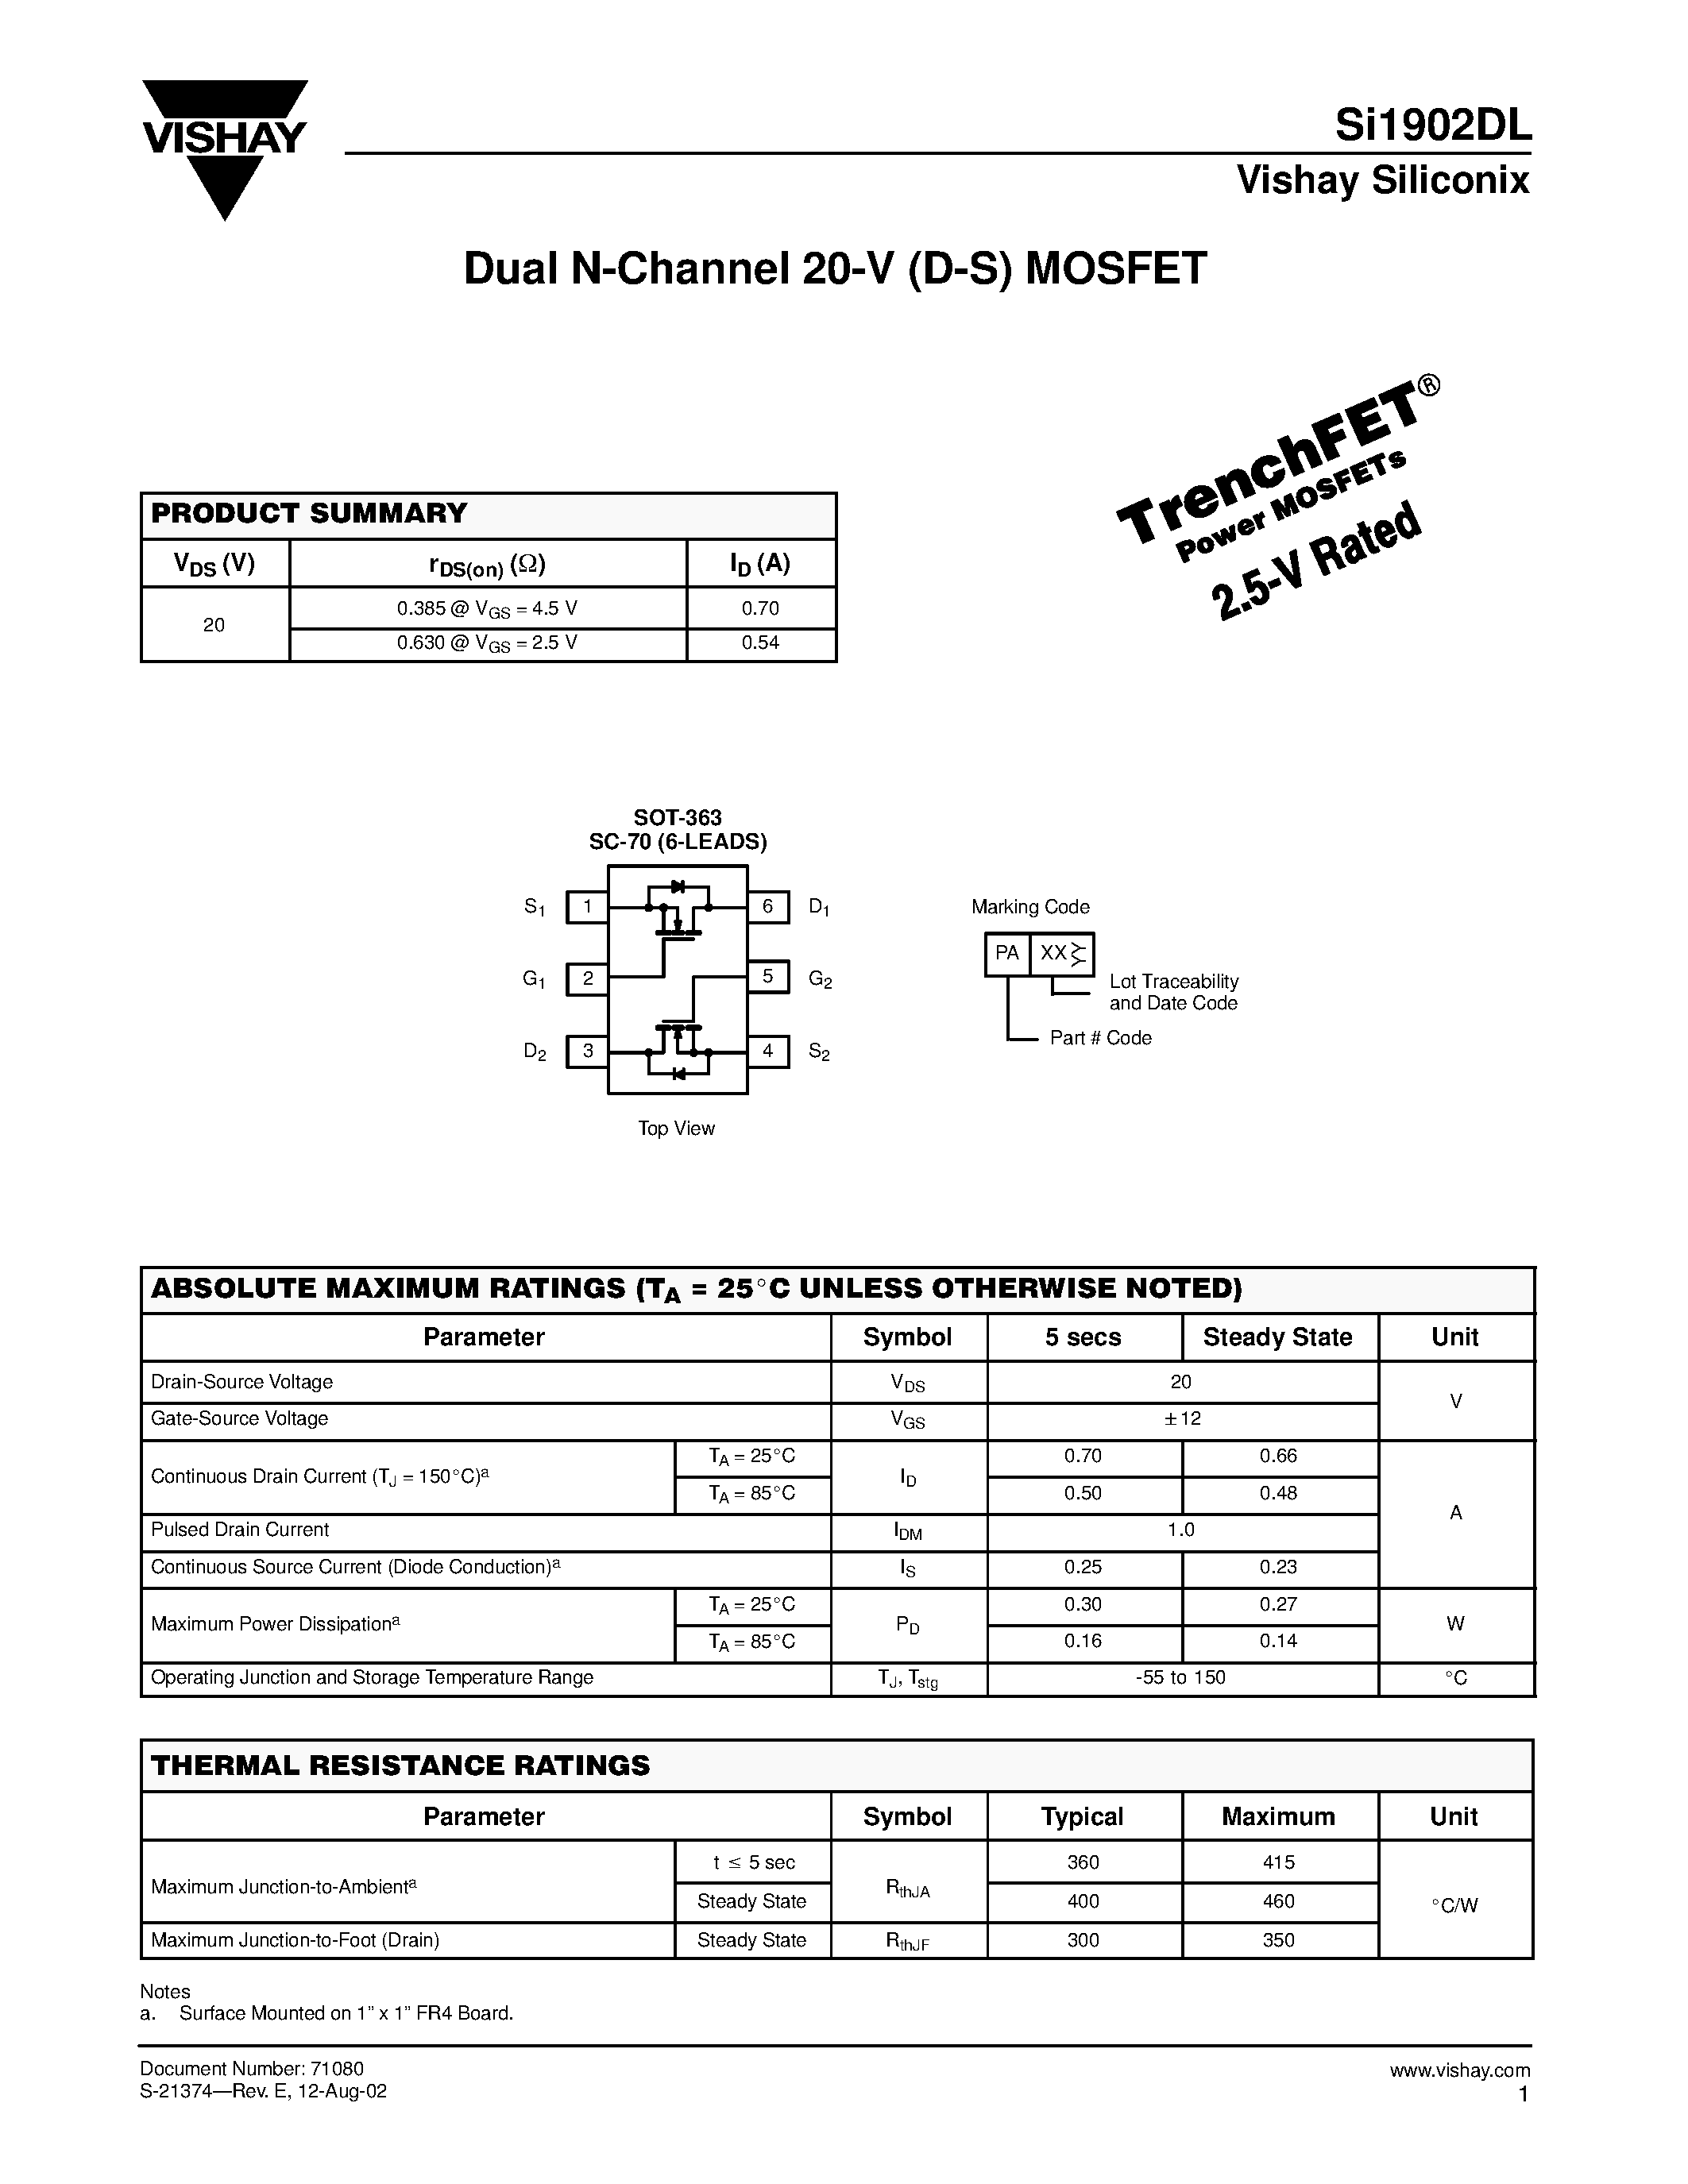 Datasheet SI1902DL - Dual N-Channel 20-V (D-S) MOSFET page 1